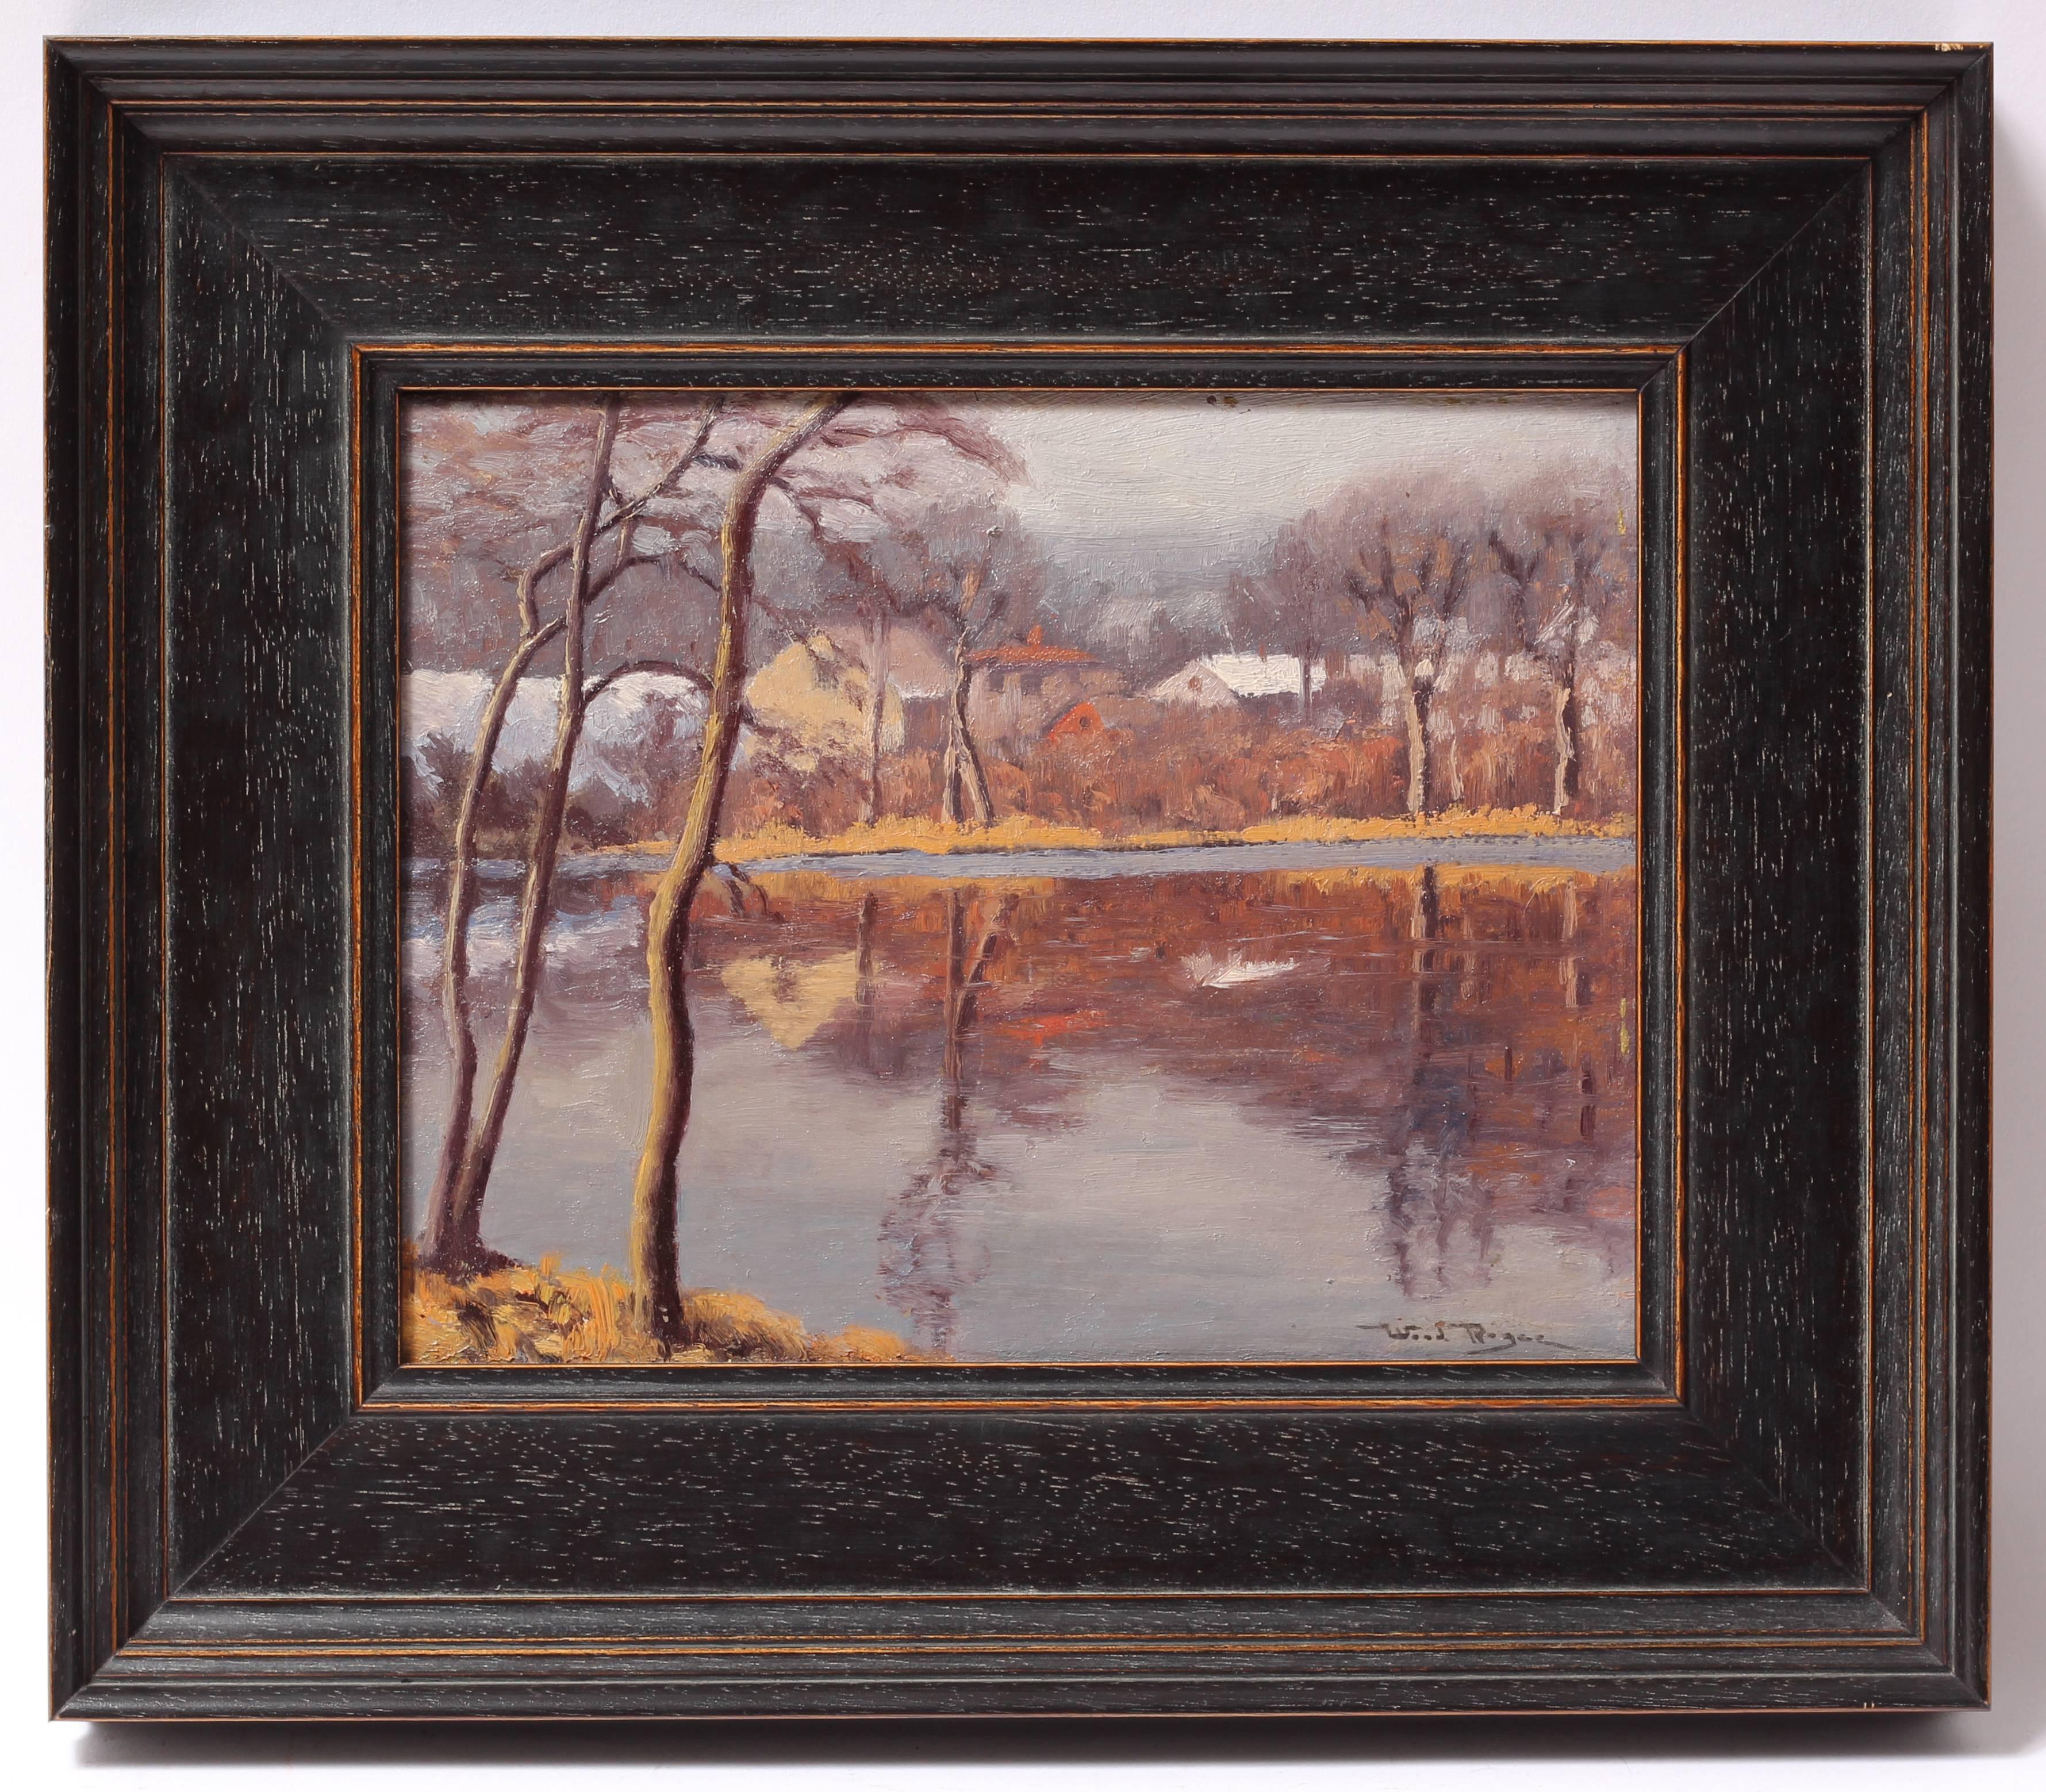 Reflections on the Pond - Painting by Woodford Royce